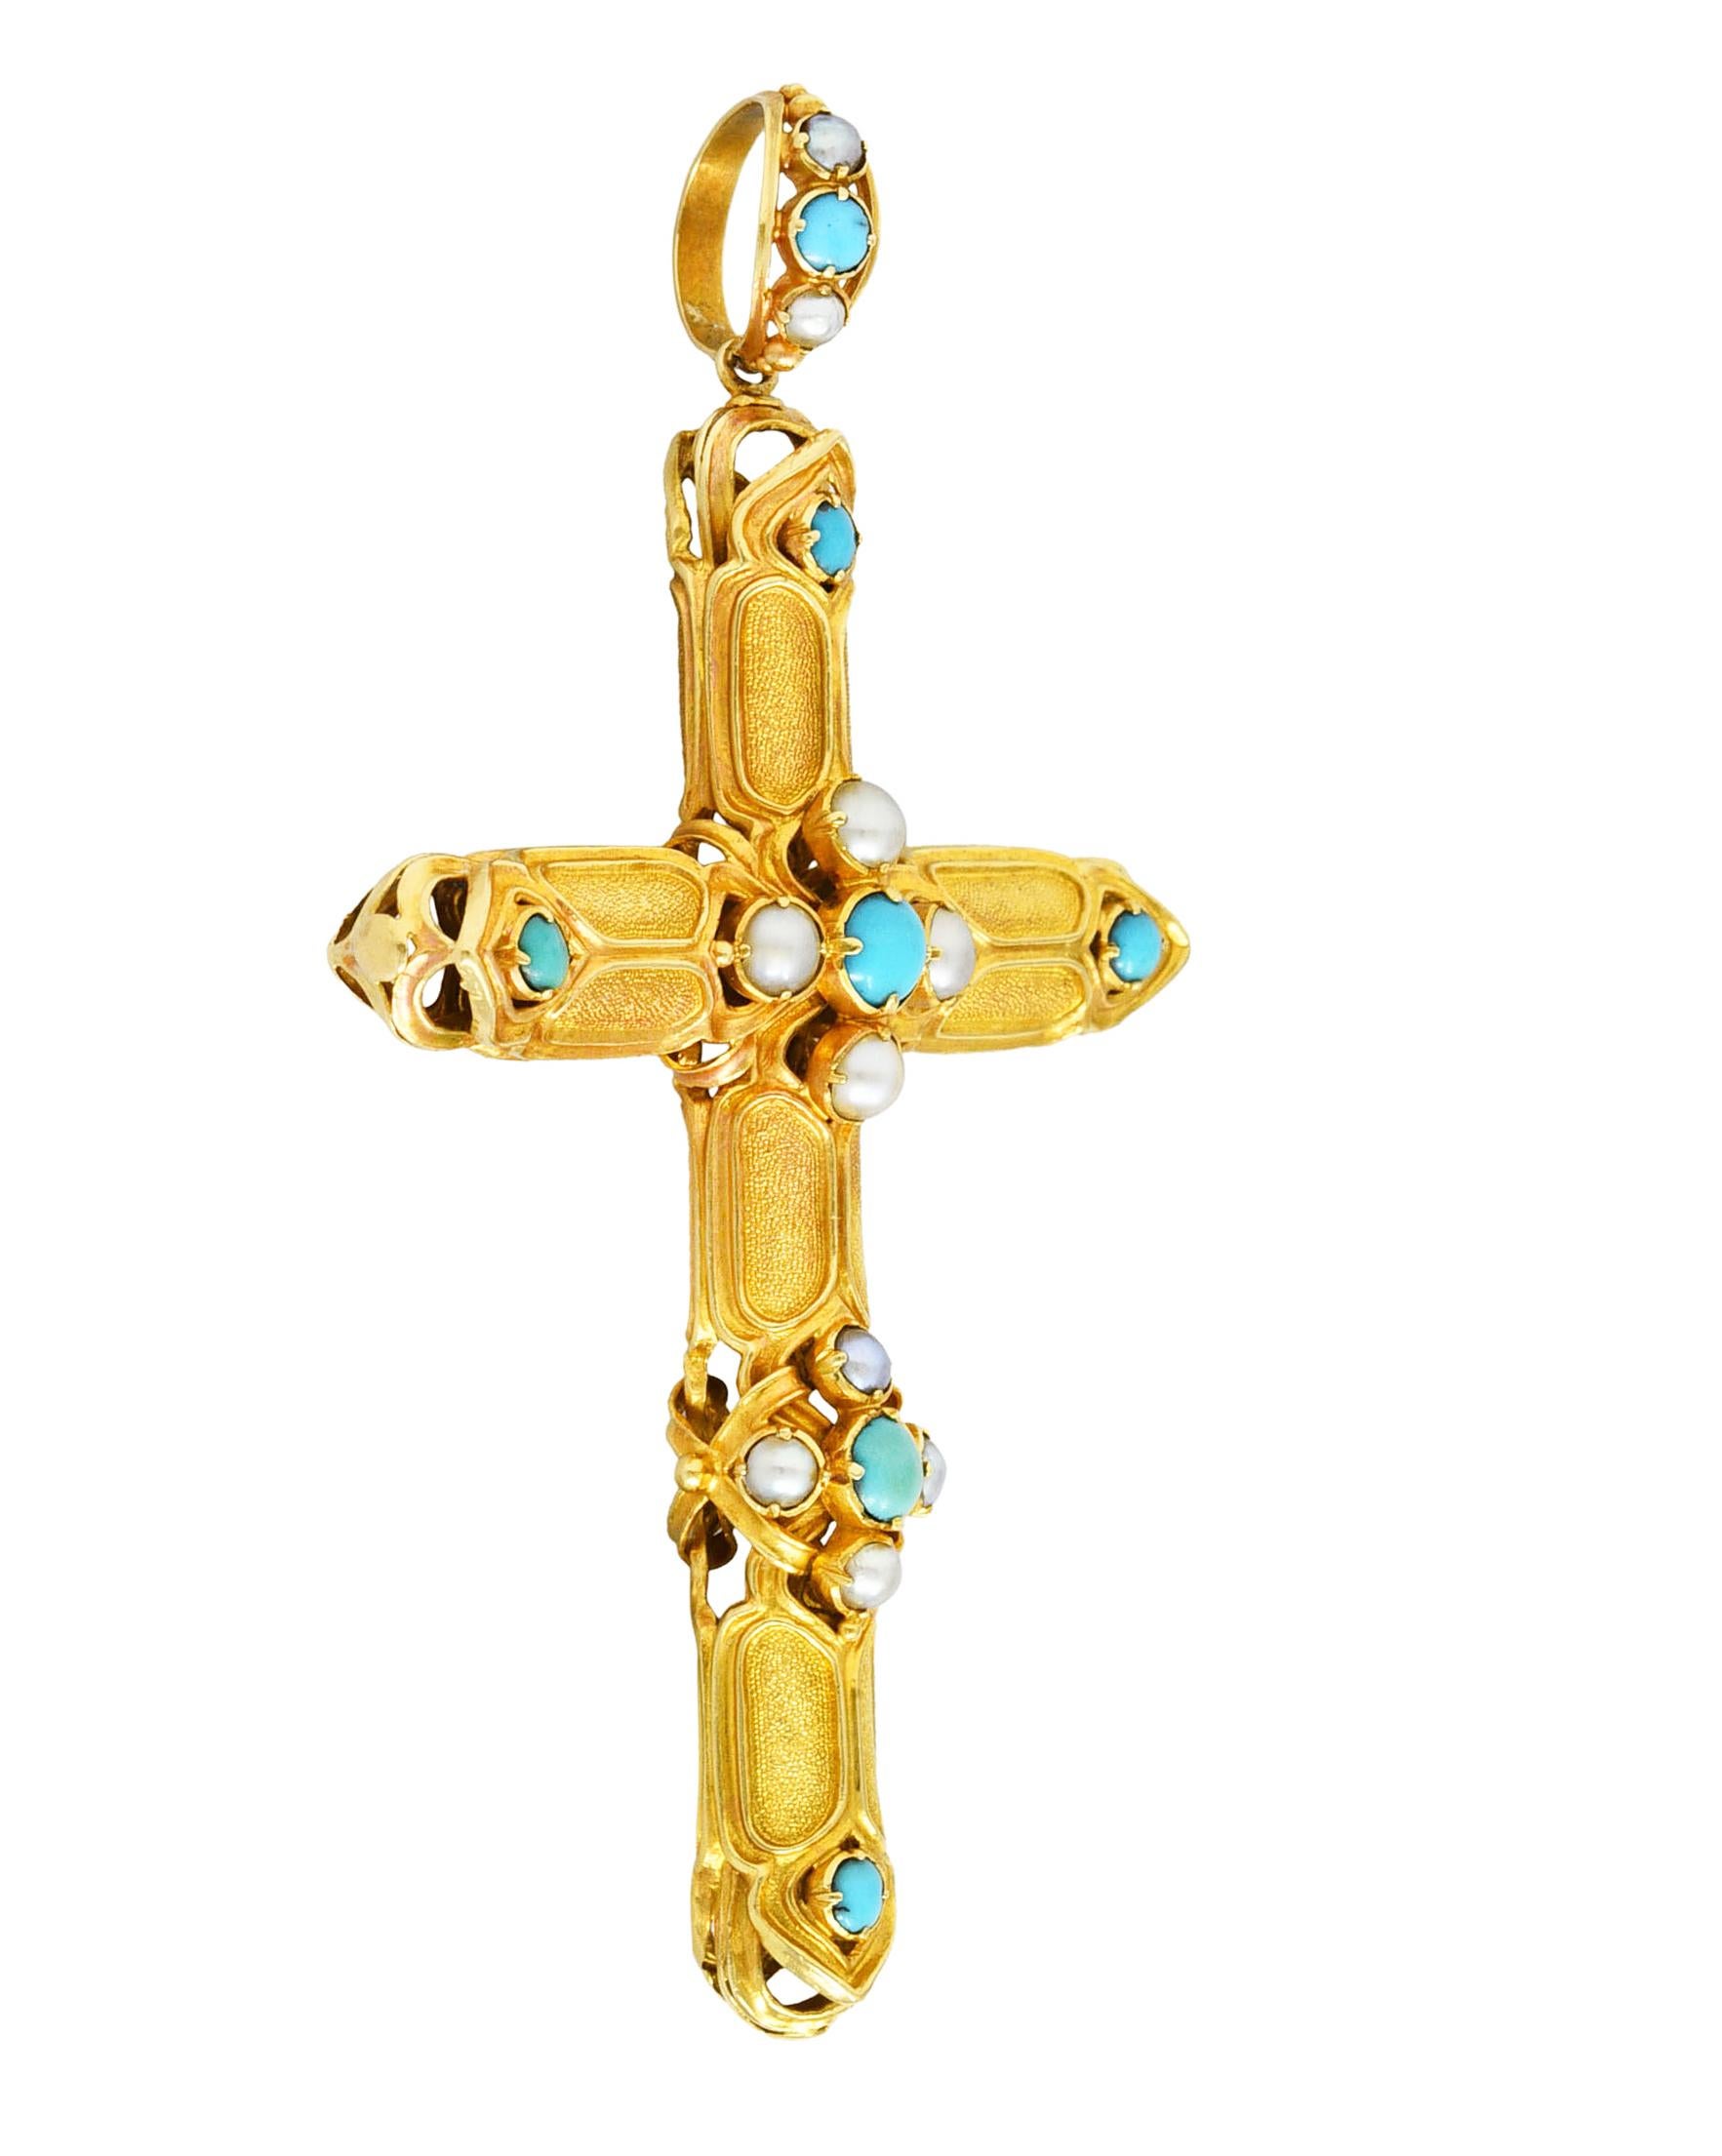 Designed as a pierced cross form with gothic tracery motif panels of textured gold recesses. Featuring 2.5 to 5.0 mm round turquoise cabochons prong set at cardinal points, center, and bale. Opaque robin's egg blue to greenish blue in color with